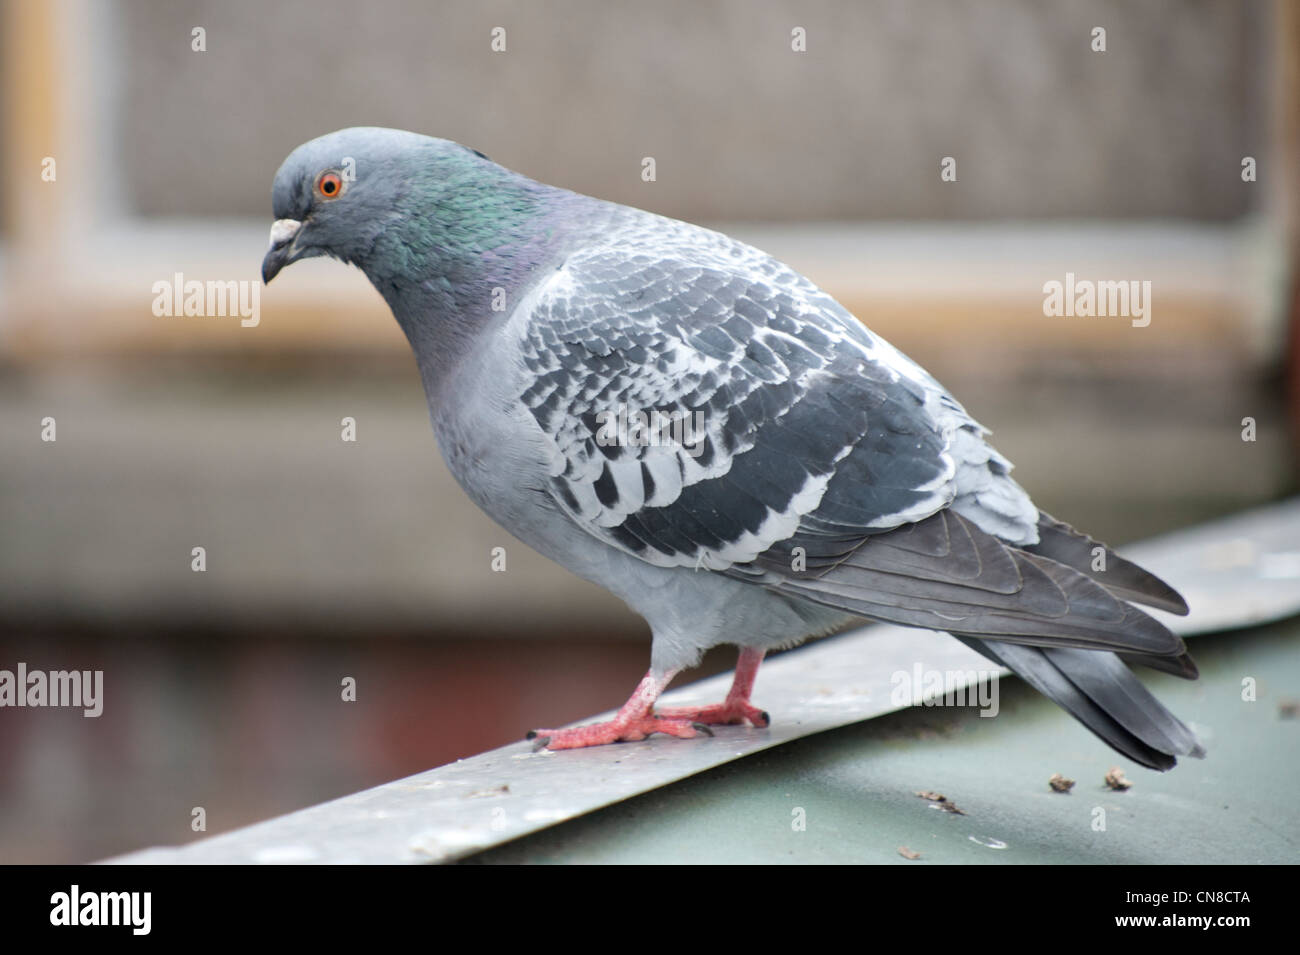 A rock dove or rock pigeon stands on a roof top looking downwards. Stock Photo